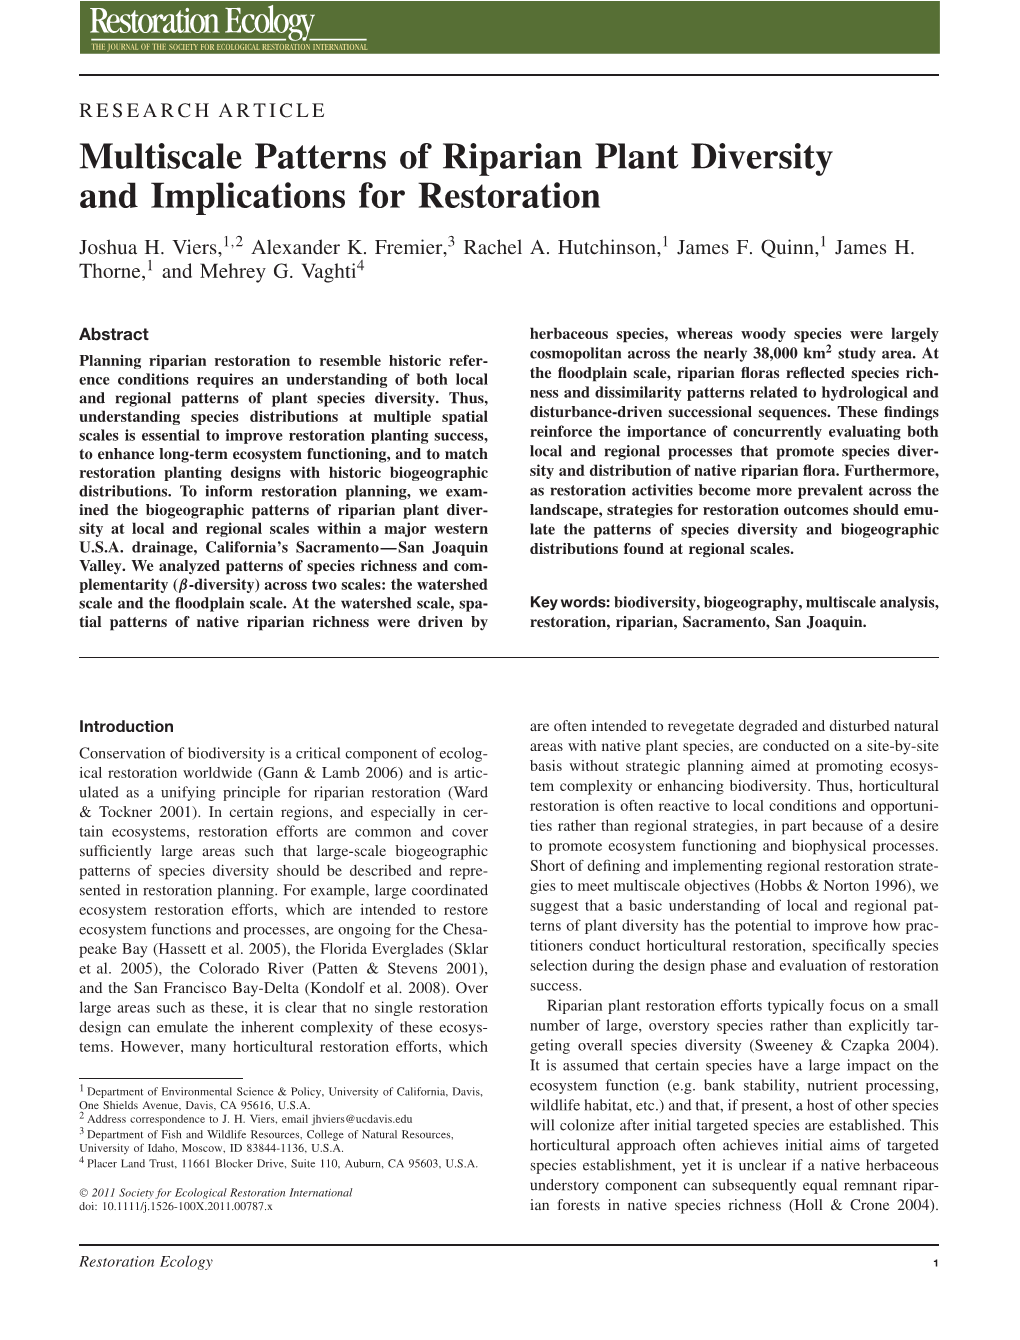 Multiscale Patterns of Riparian Plant Diversity and Implications for Restoration